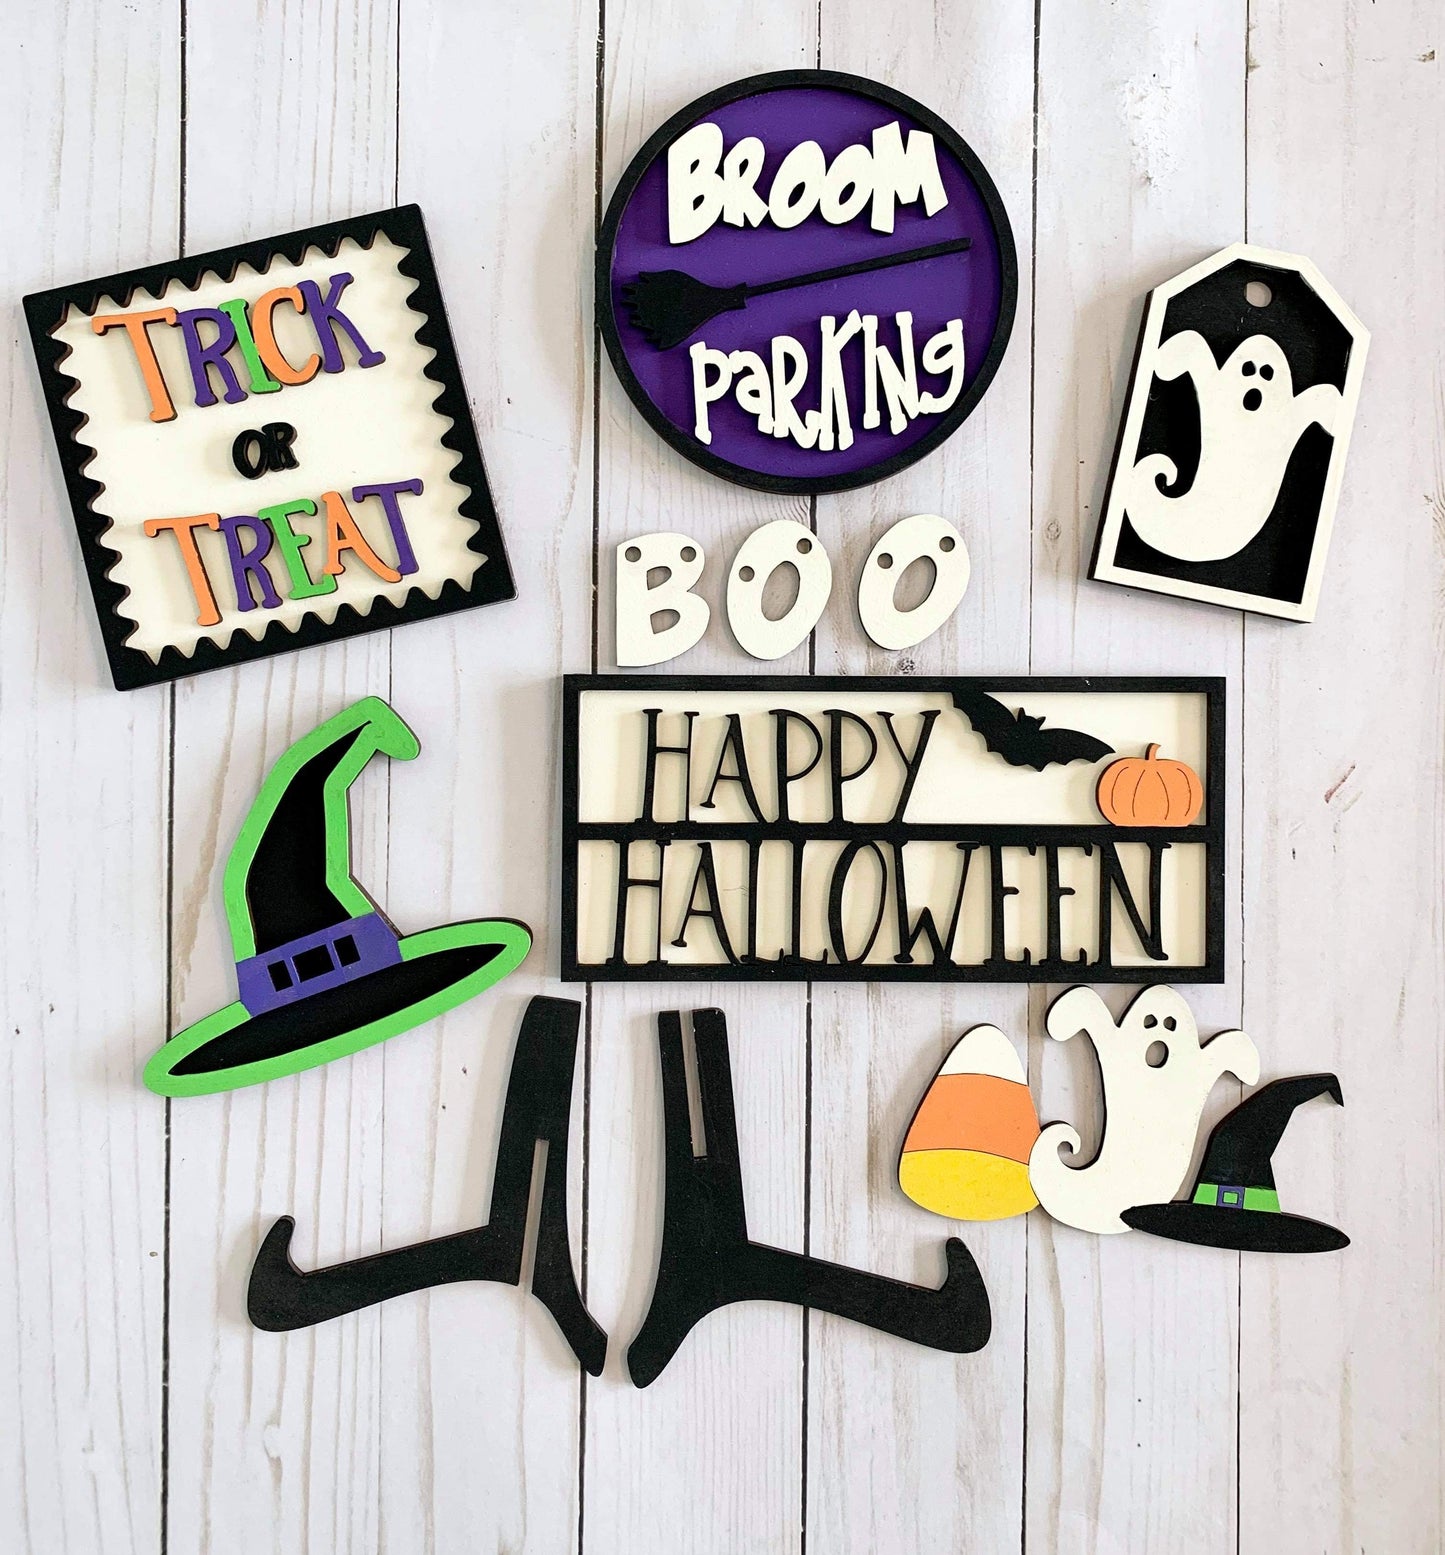 DIY Kit - Tiered Tray - Trick or Treat